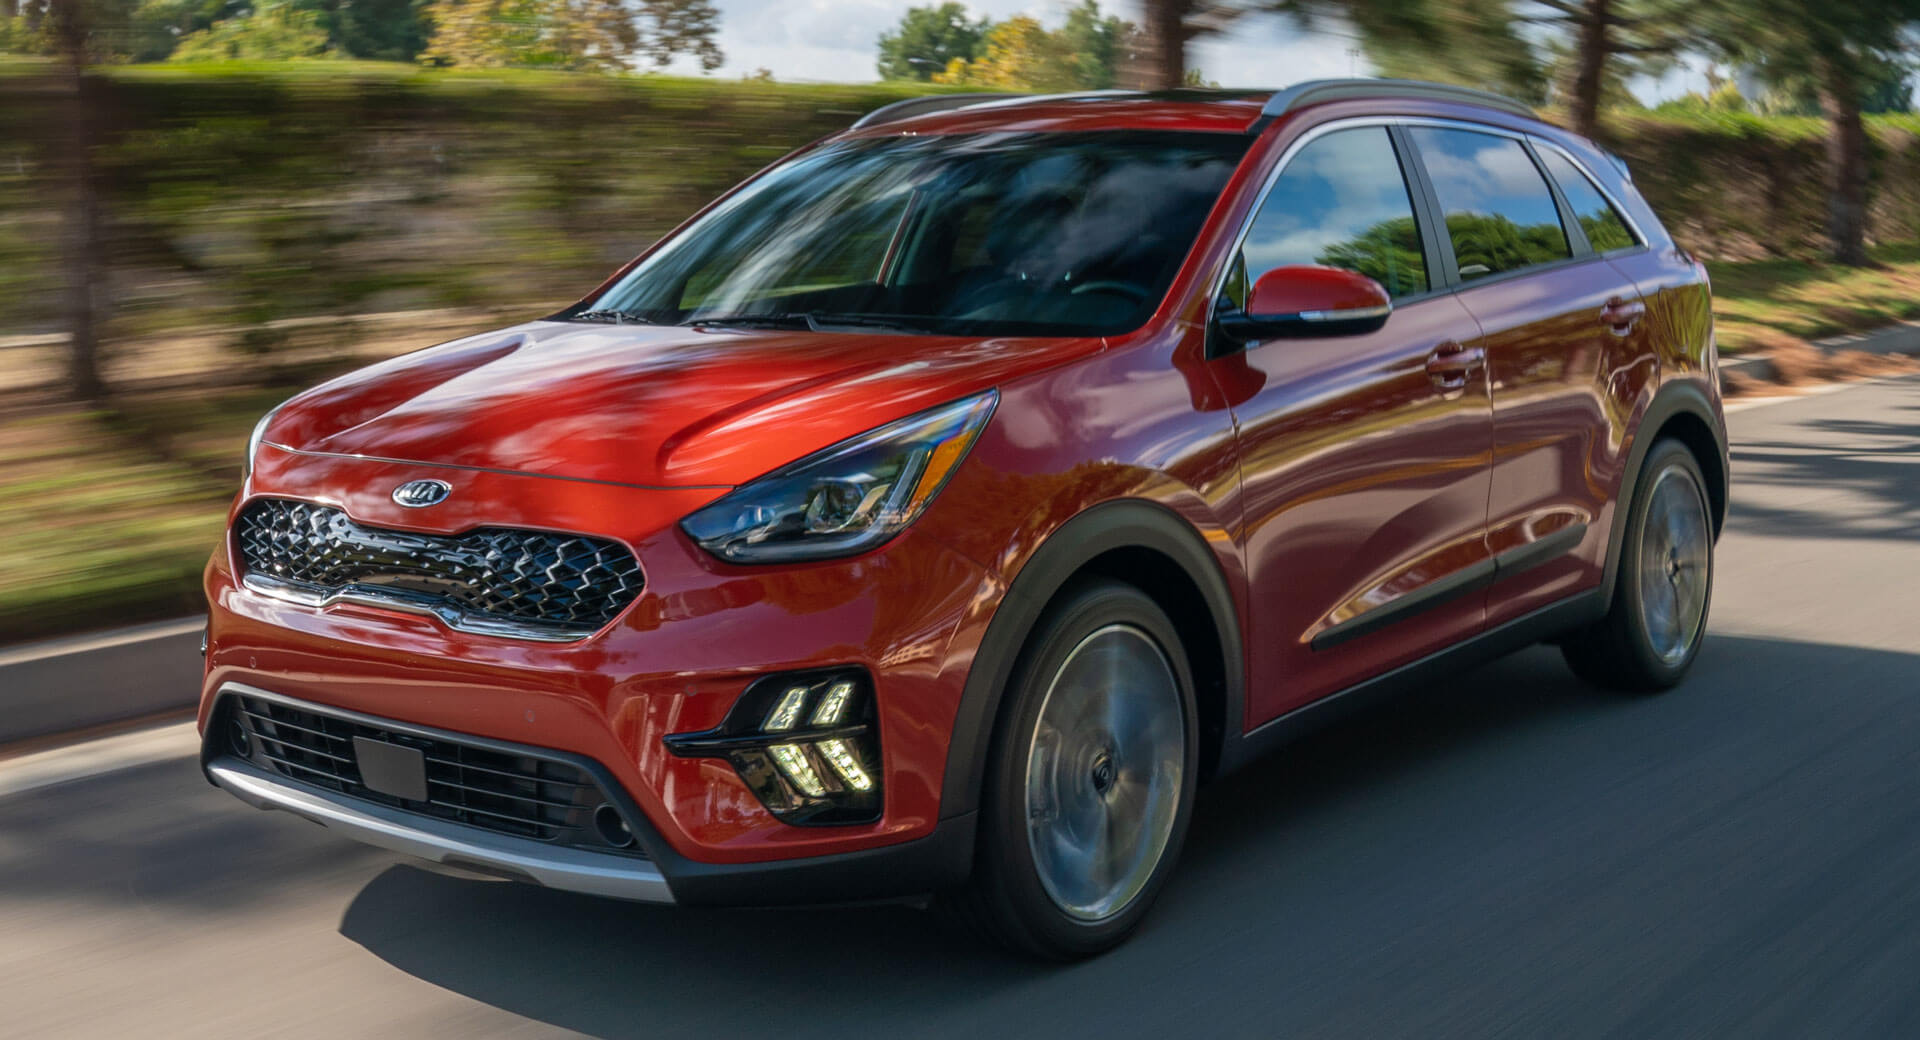 2020 Kia Niro Goes Under The Adds New | Carscoops